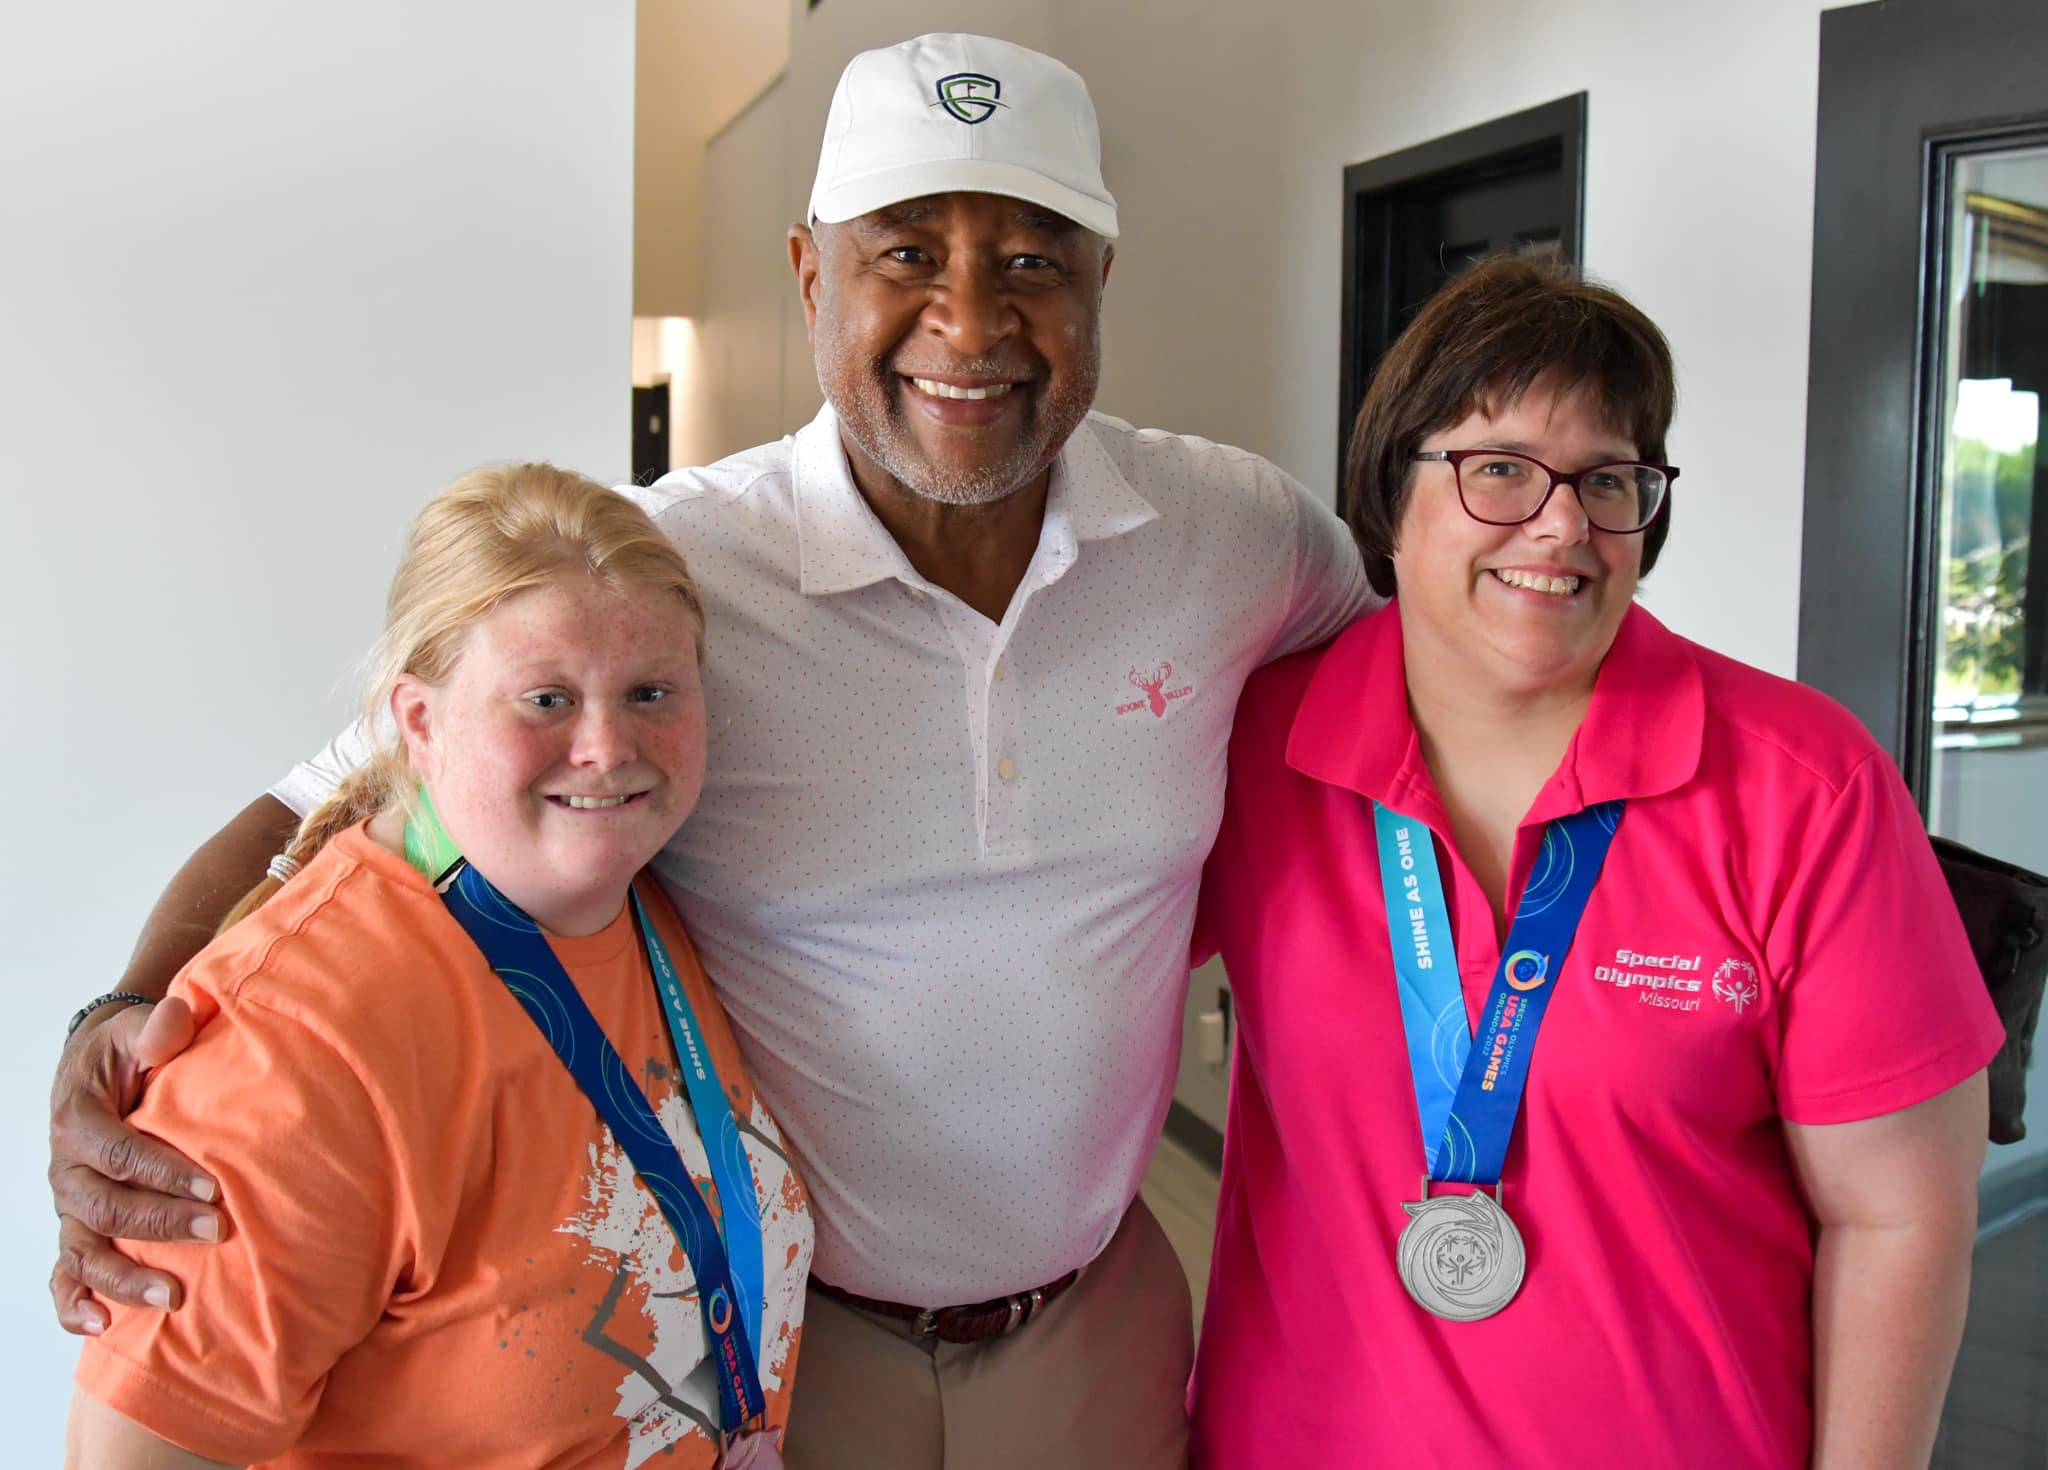 SOMO athletes Ozzie Smith and Abby Bax pose for a picture with Cardinals legend Ozzie Smith at Eagle Knoll Golf Club on Monday, July 18, 2022.